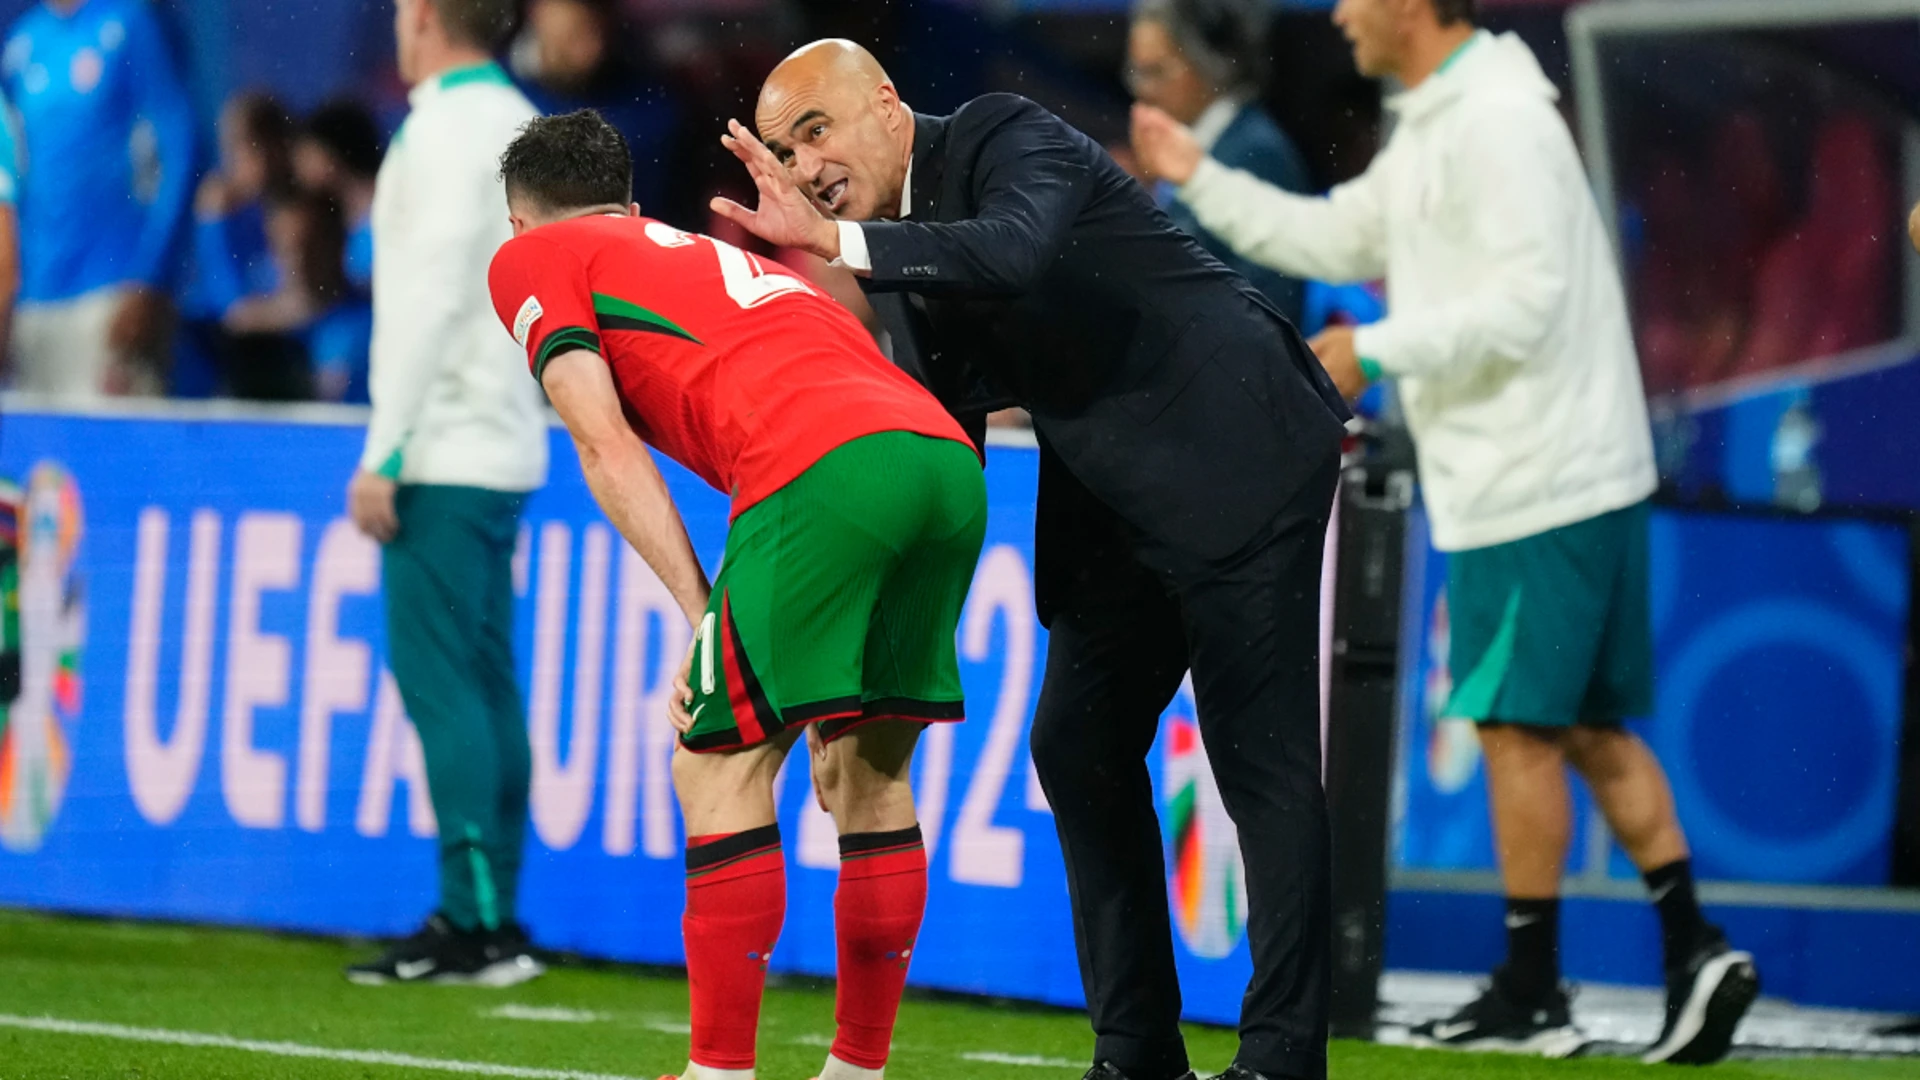 Portugal hero Conceicao 'earned it' - coach Martinez